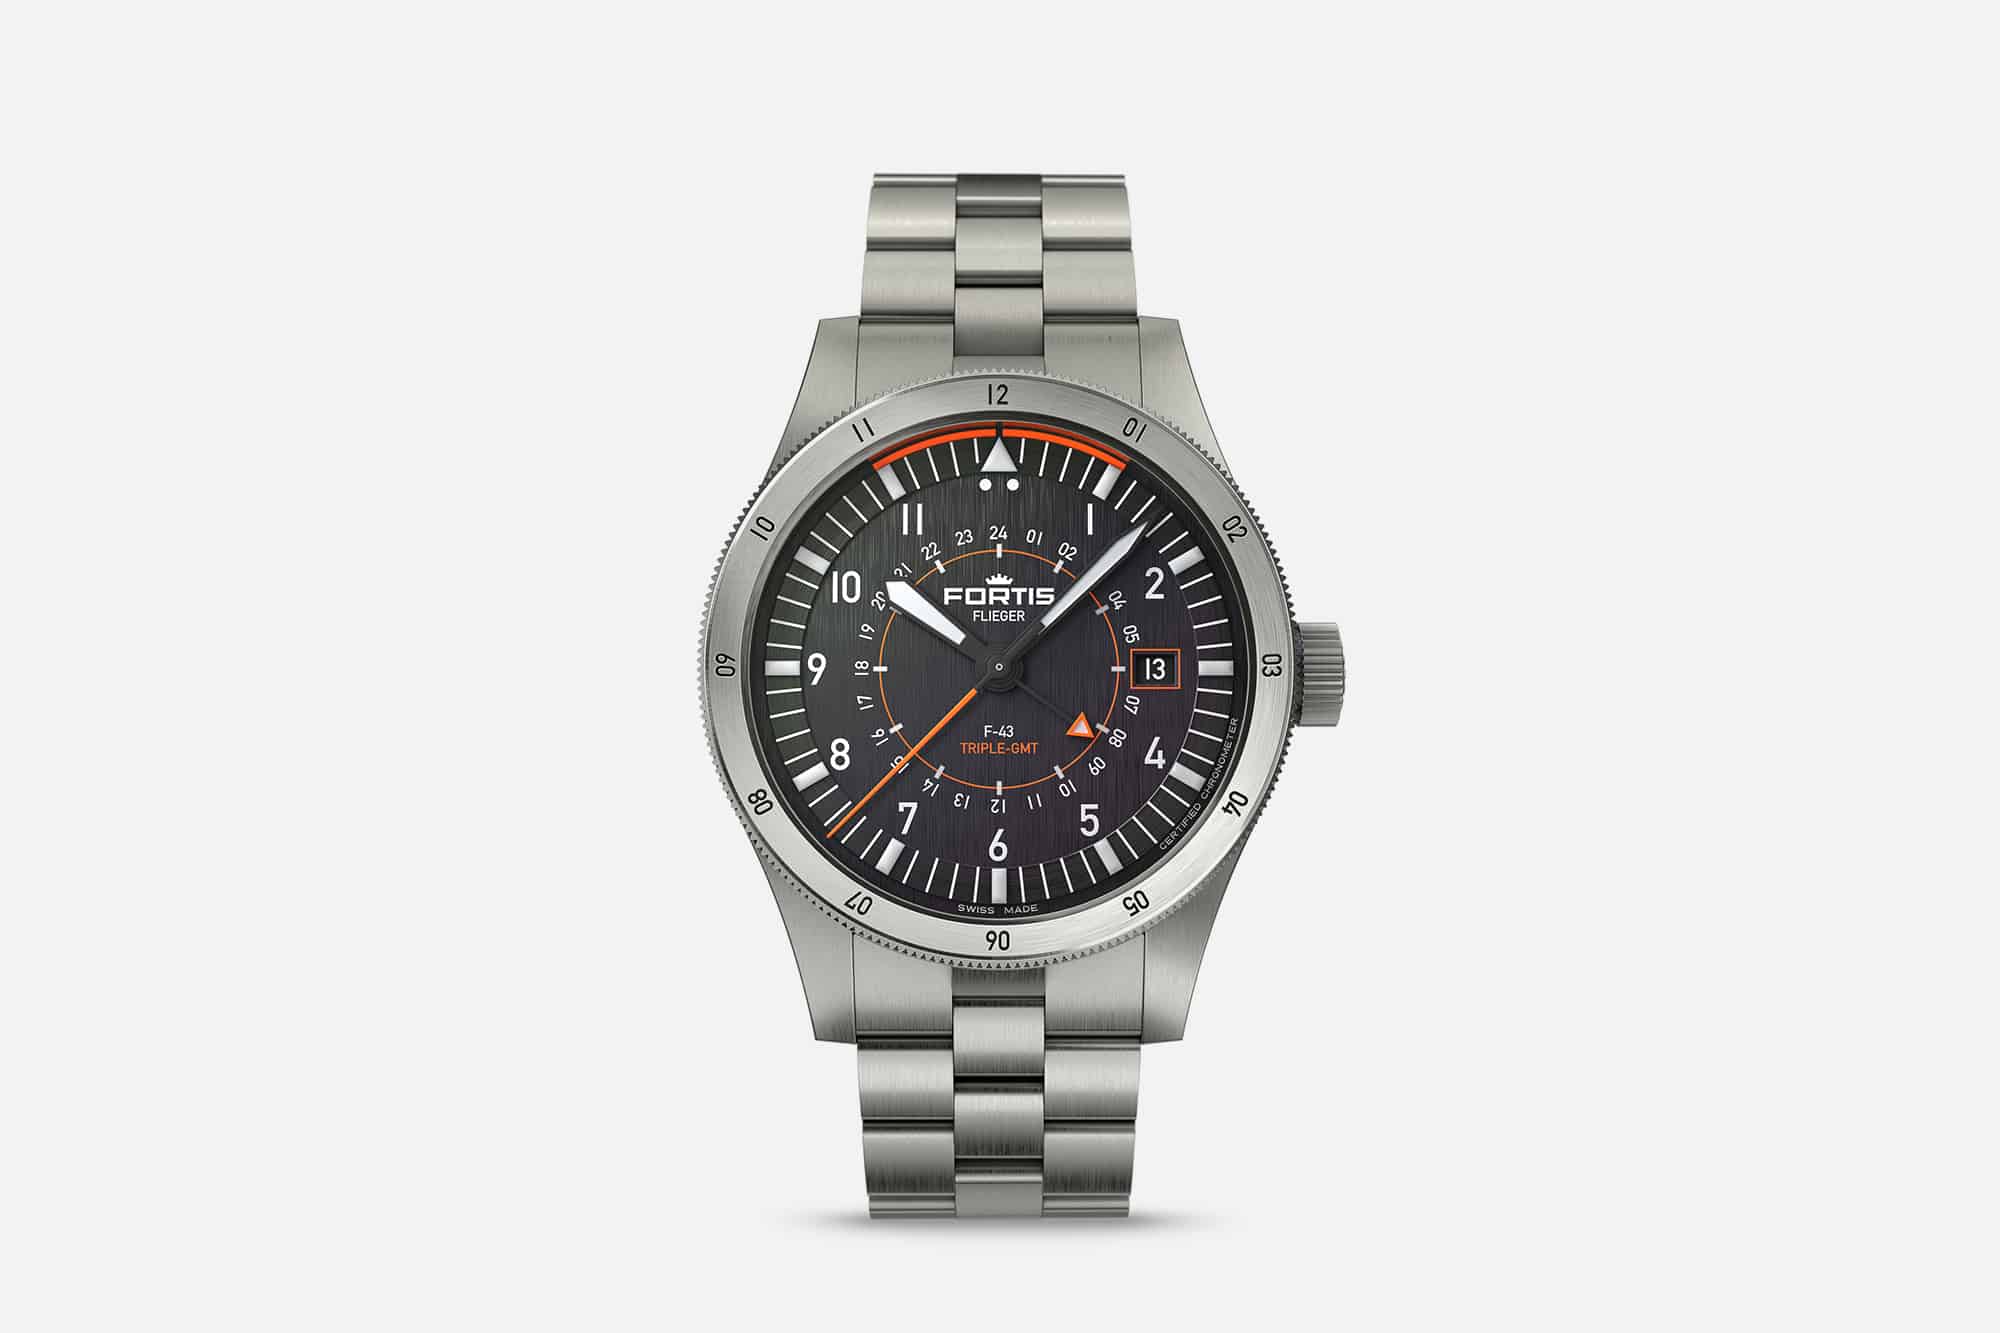 Fortis Further Expands Their Flieger Lineup with a New (True) GMT